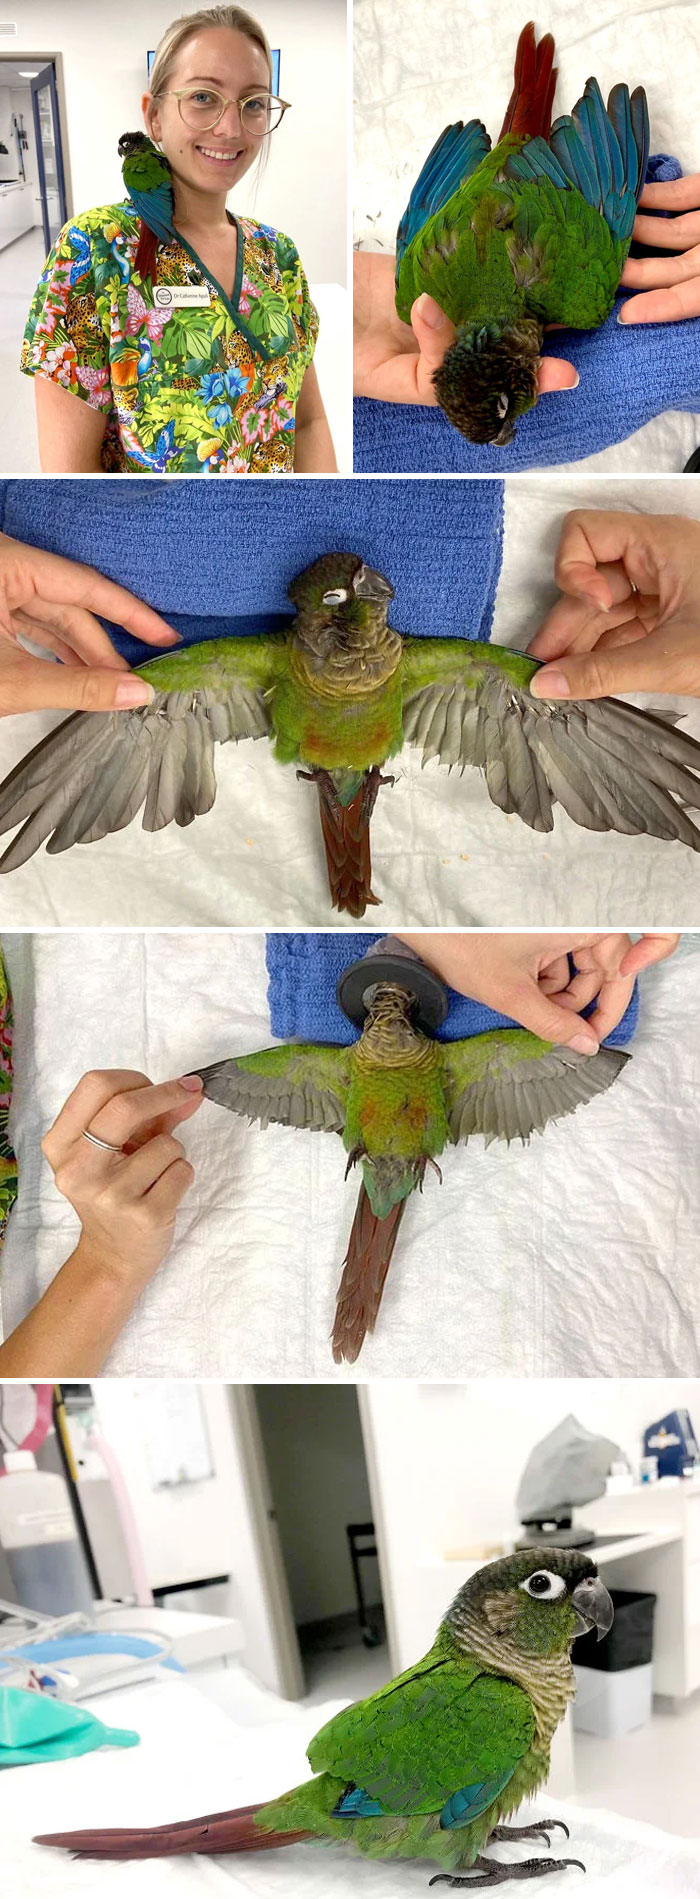 A Veterinarian Helped A 12-Week-Old Parrot To Take A Flight Again After A "Severe Wing Trim" Left It Unable To Fly